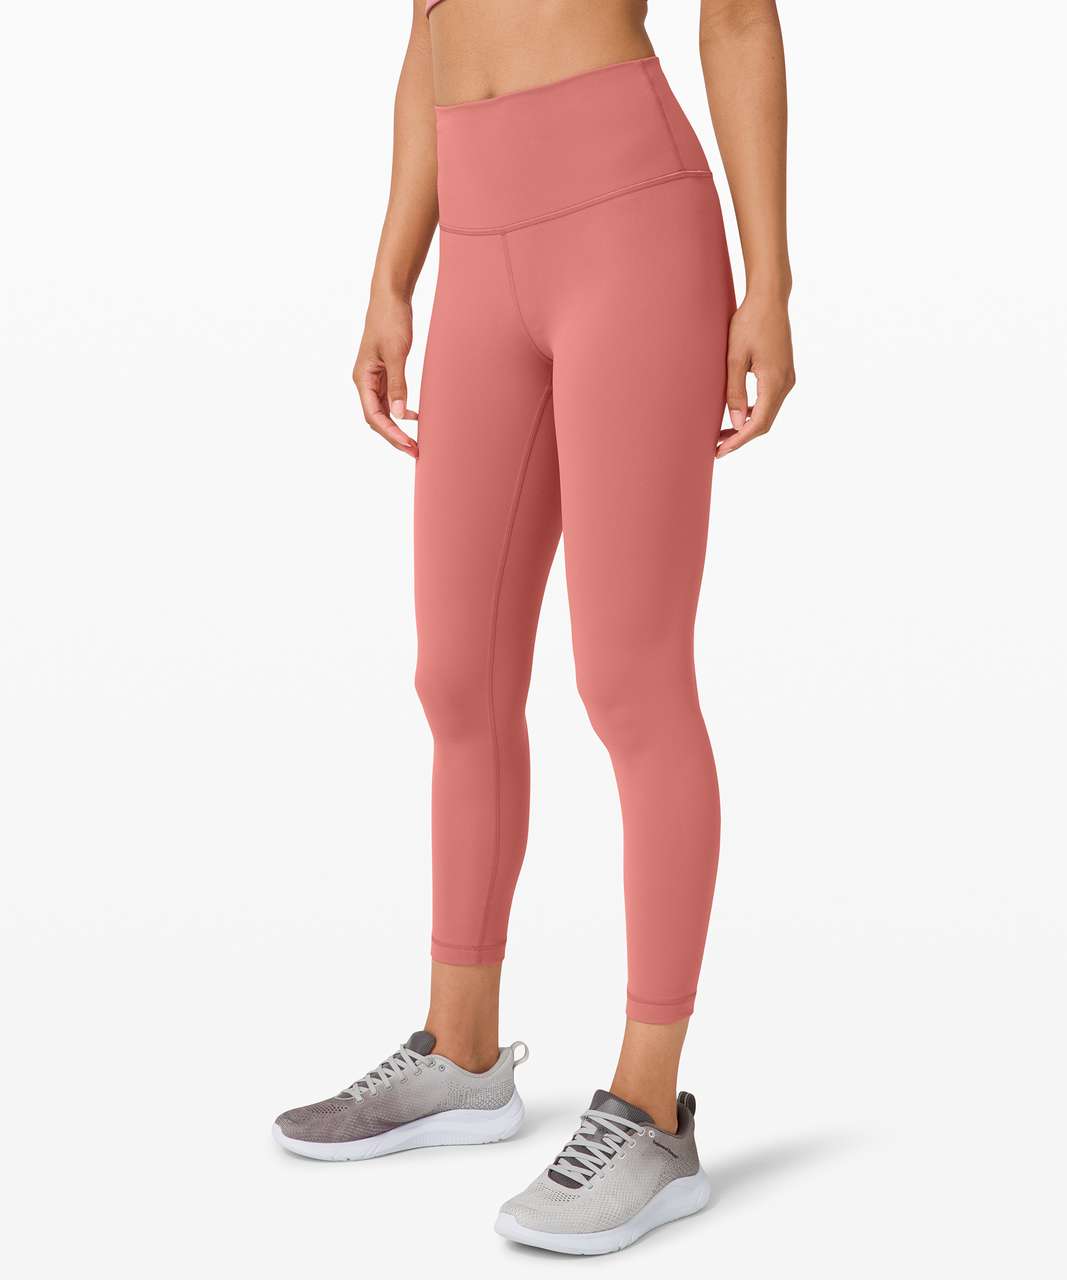 Lululemon Wunder Train High-Rise Tight 25" - Brier Rose (First Release)